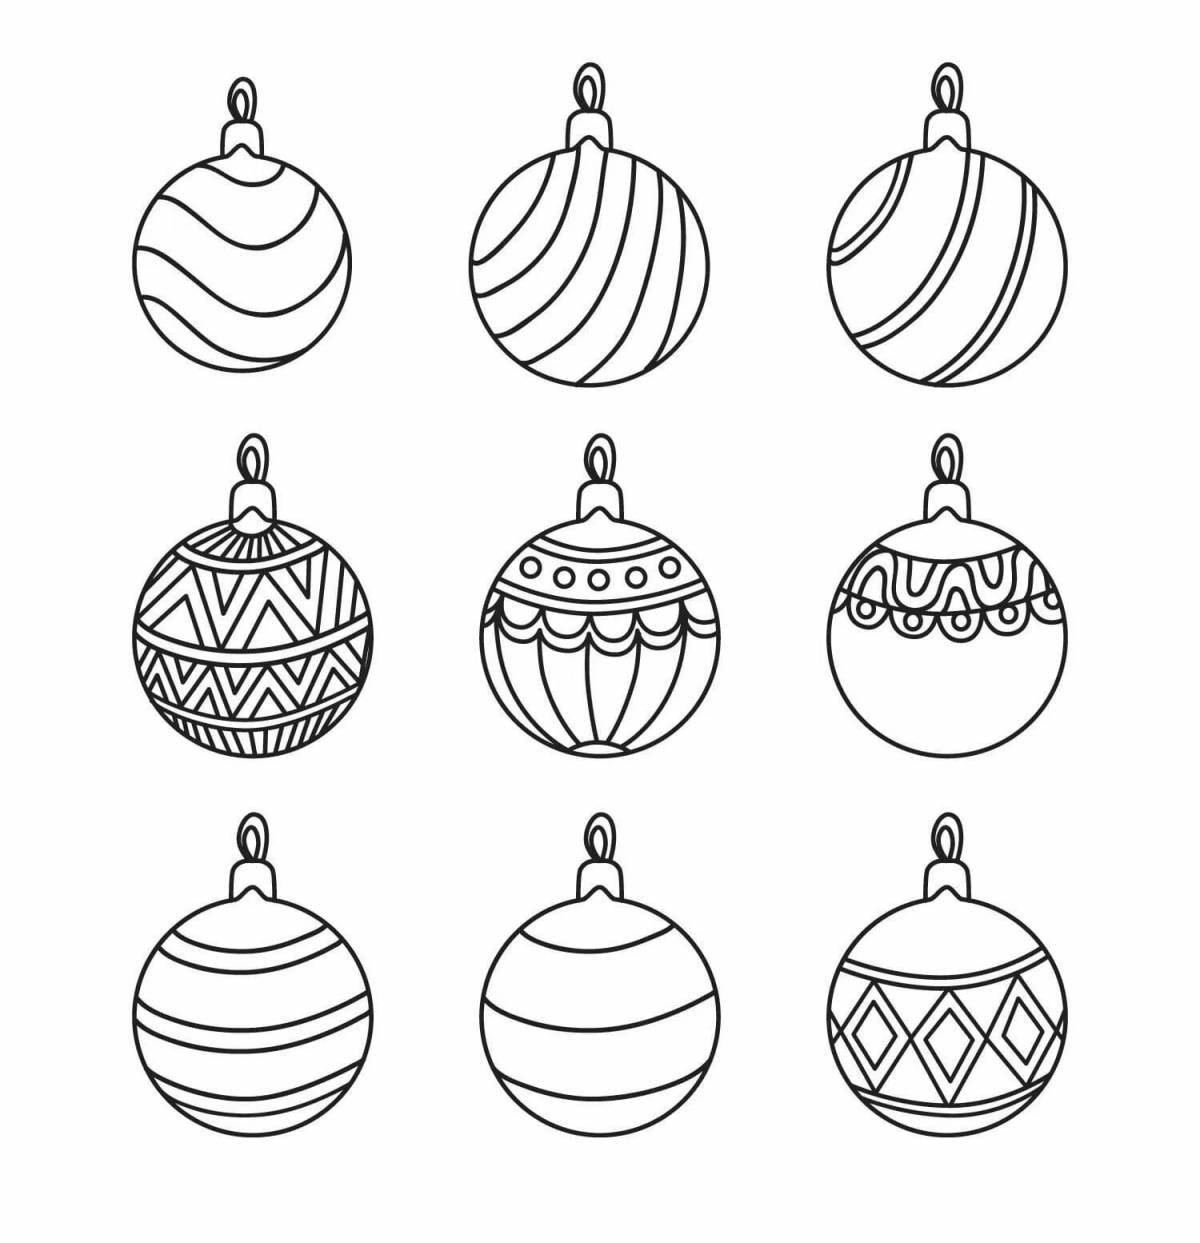 Fancy Christmas ball toy coloring book